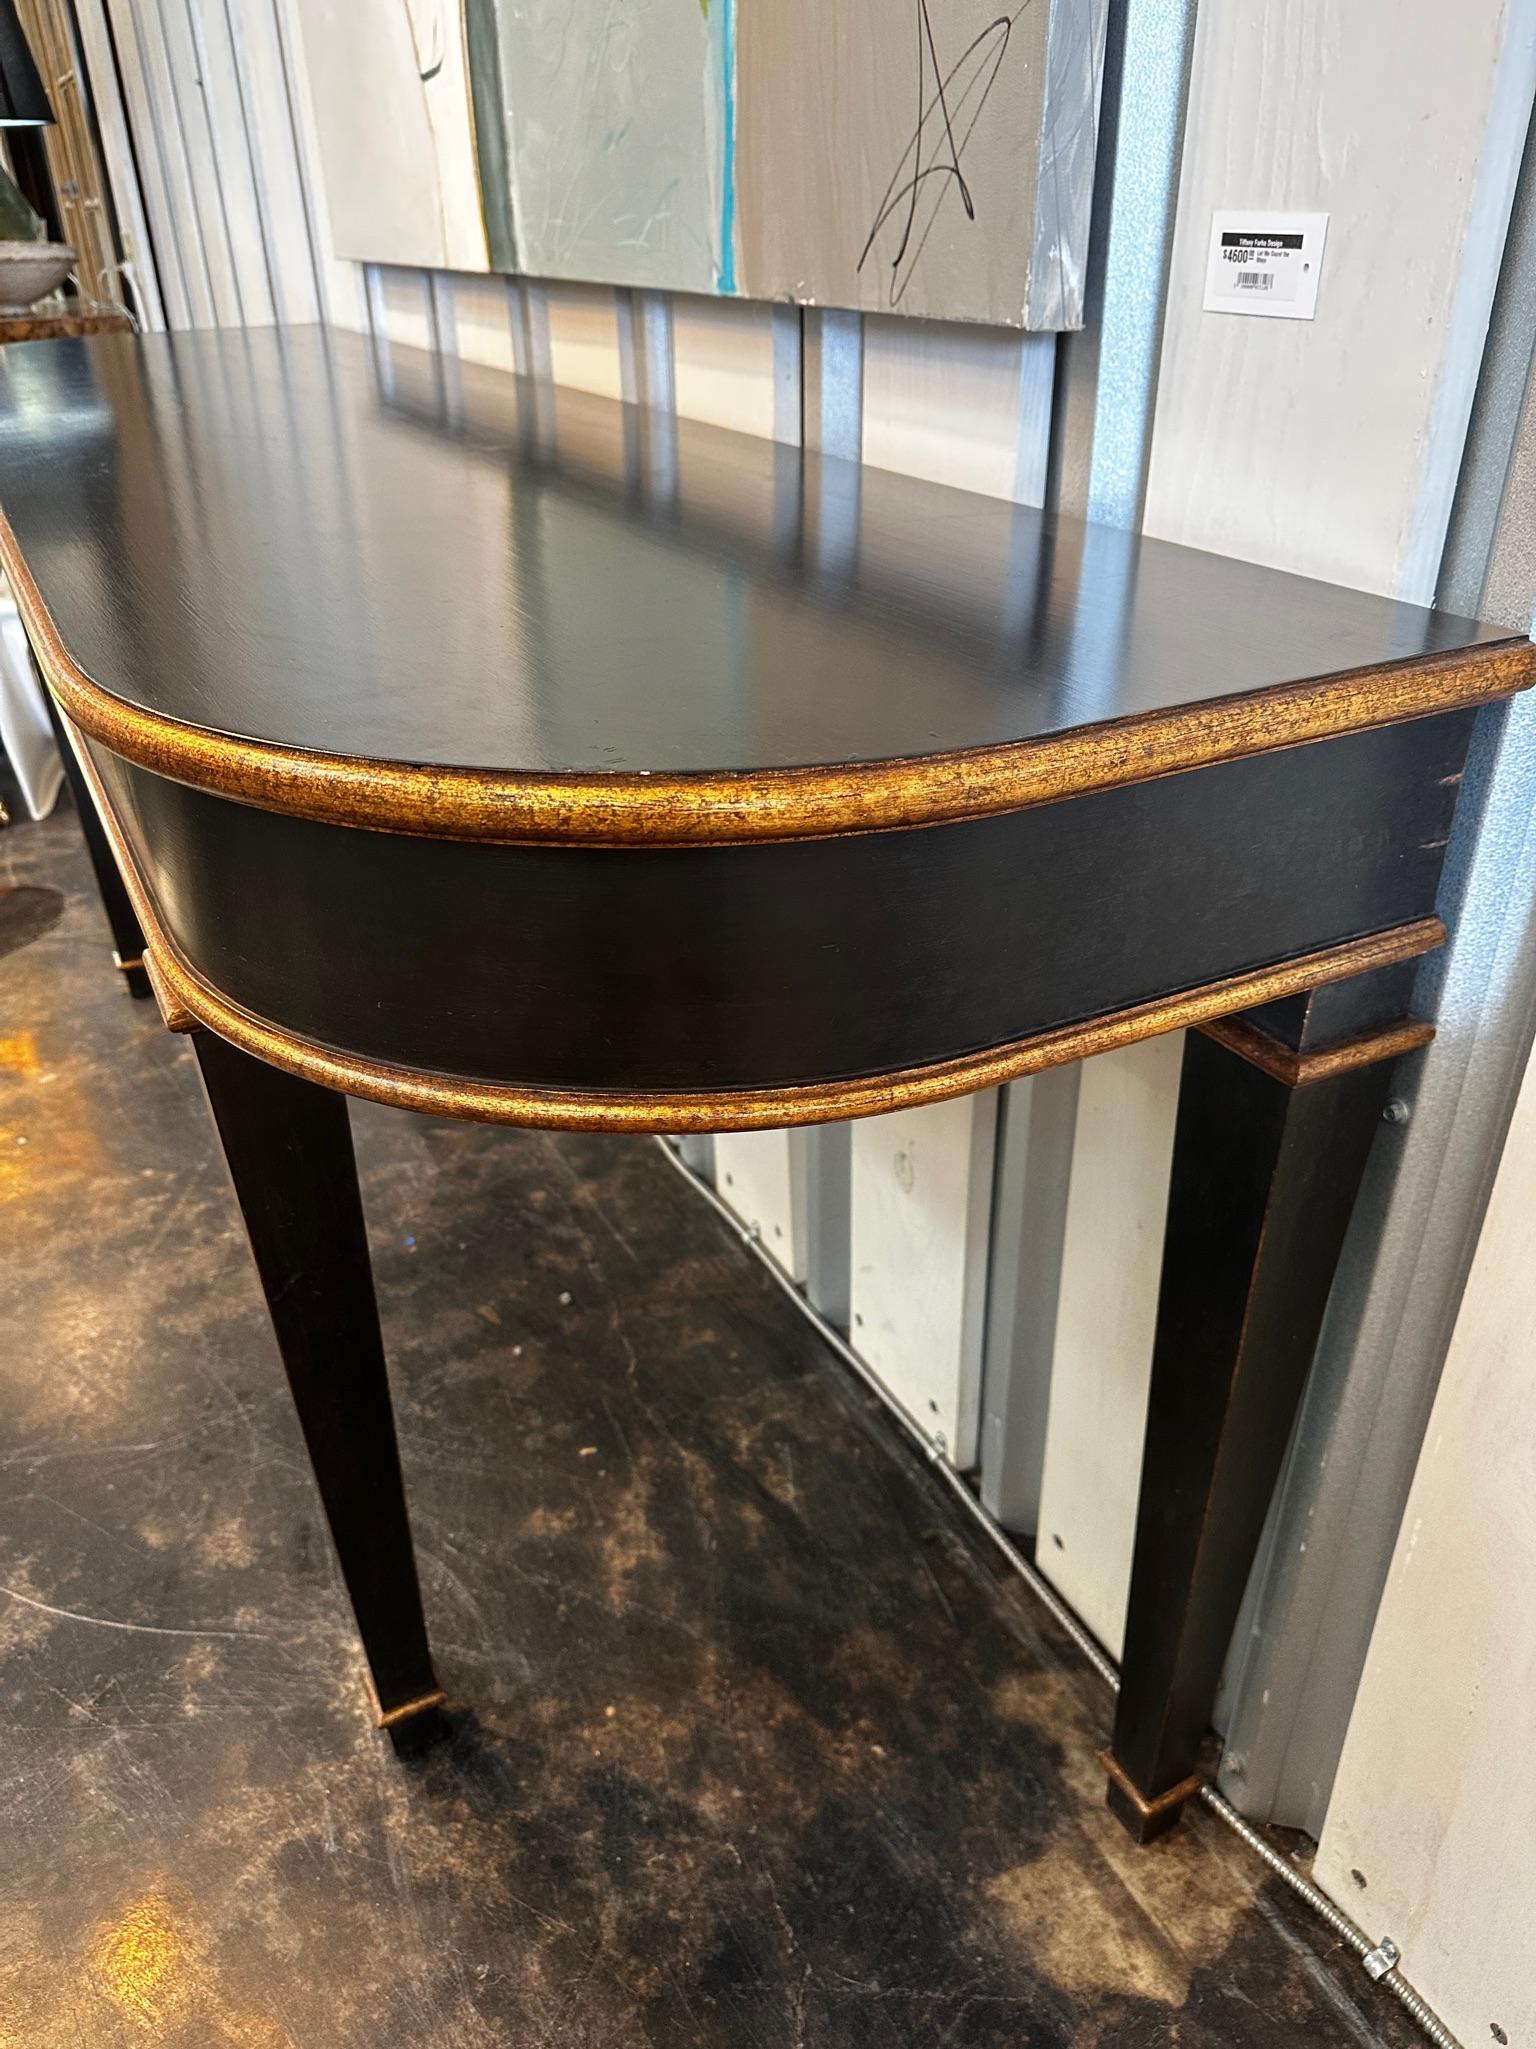 This beautiful and large custom console table with black lacquer finish and gilt details is stunning. Its simple form and finish make it a perfect fit in many decorative styles. Some may call it French, some may say Hepplewhite inspired. the